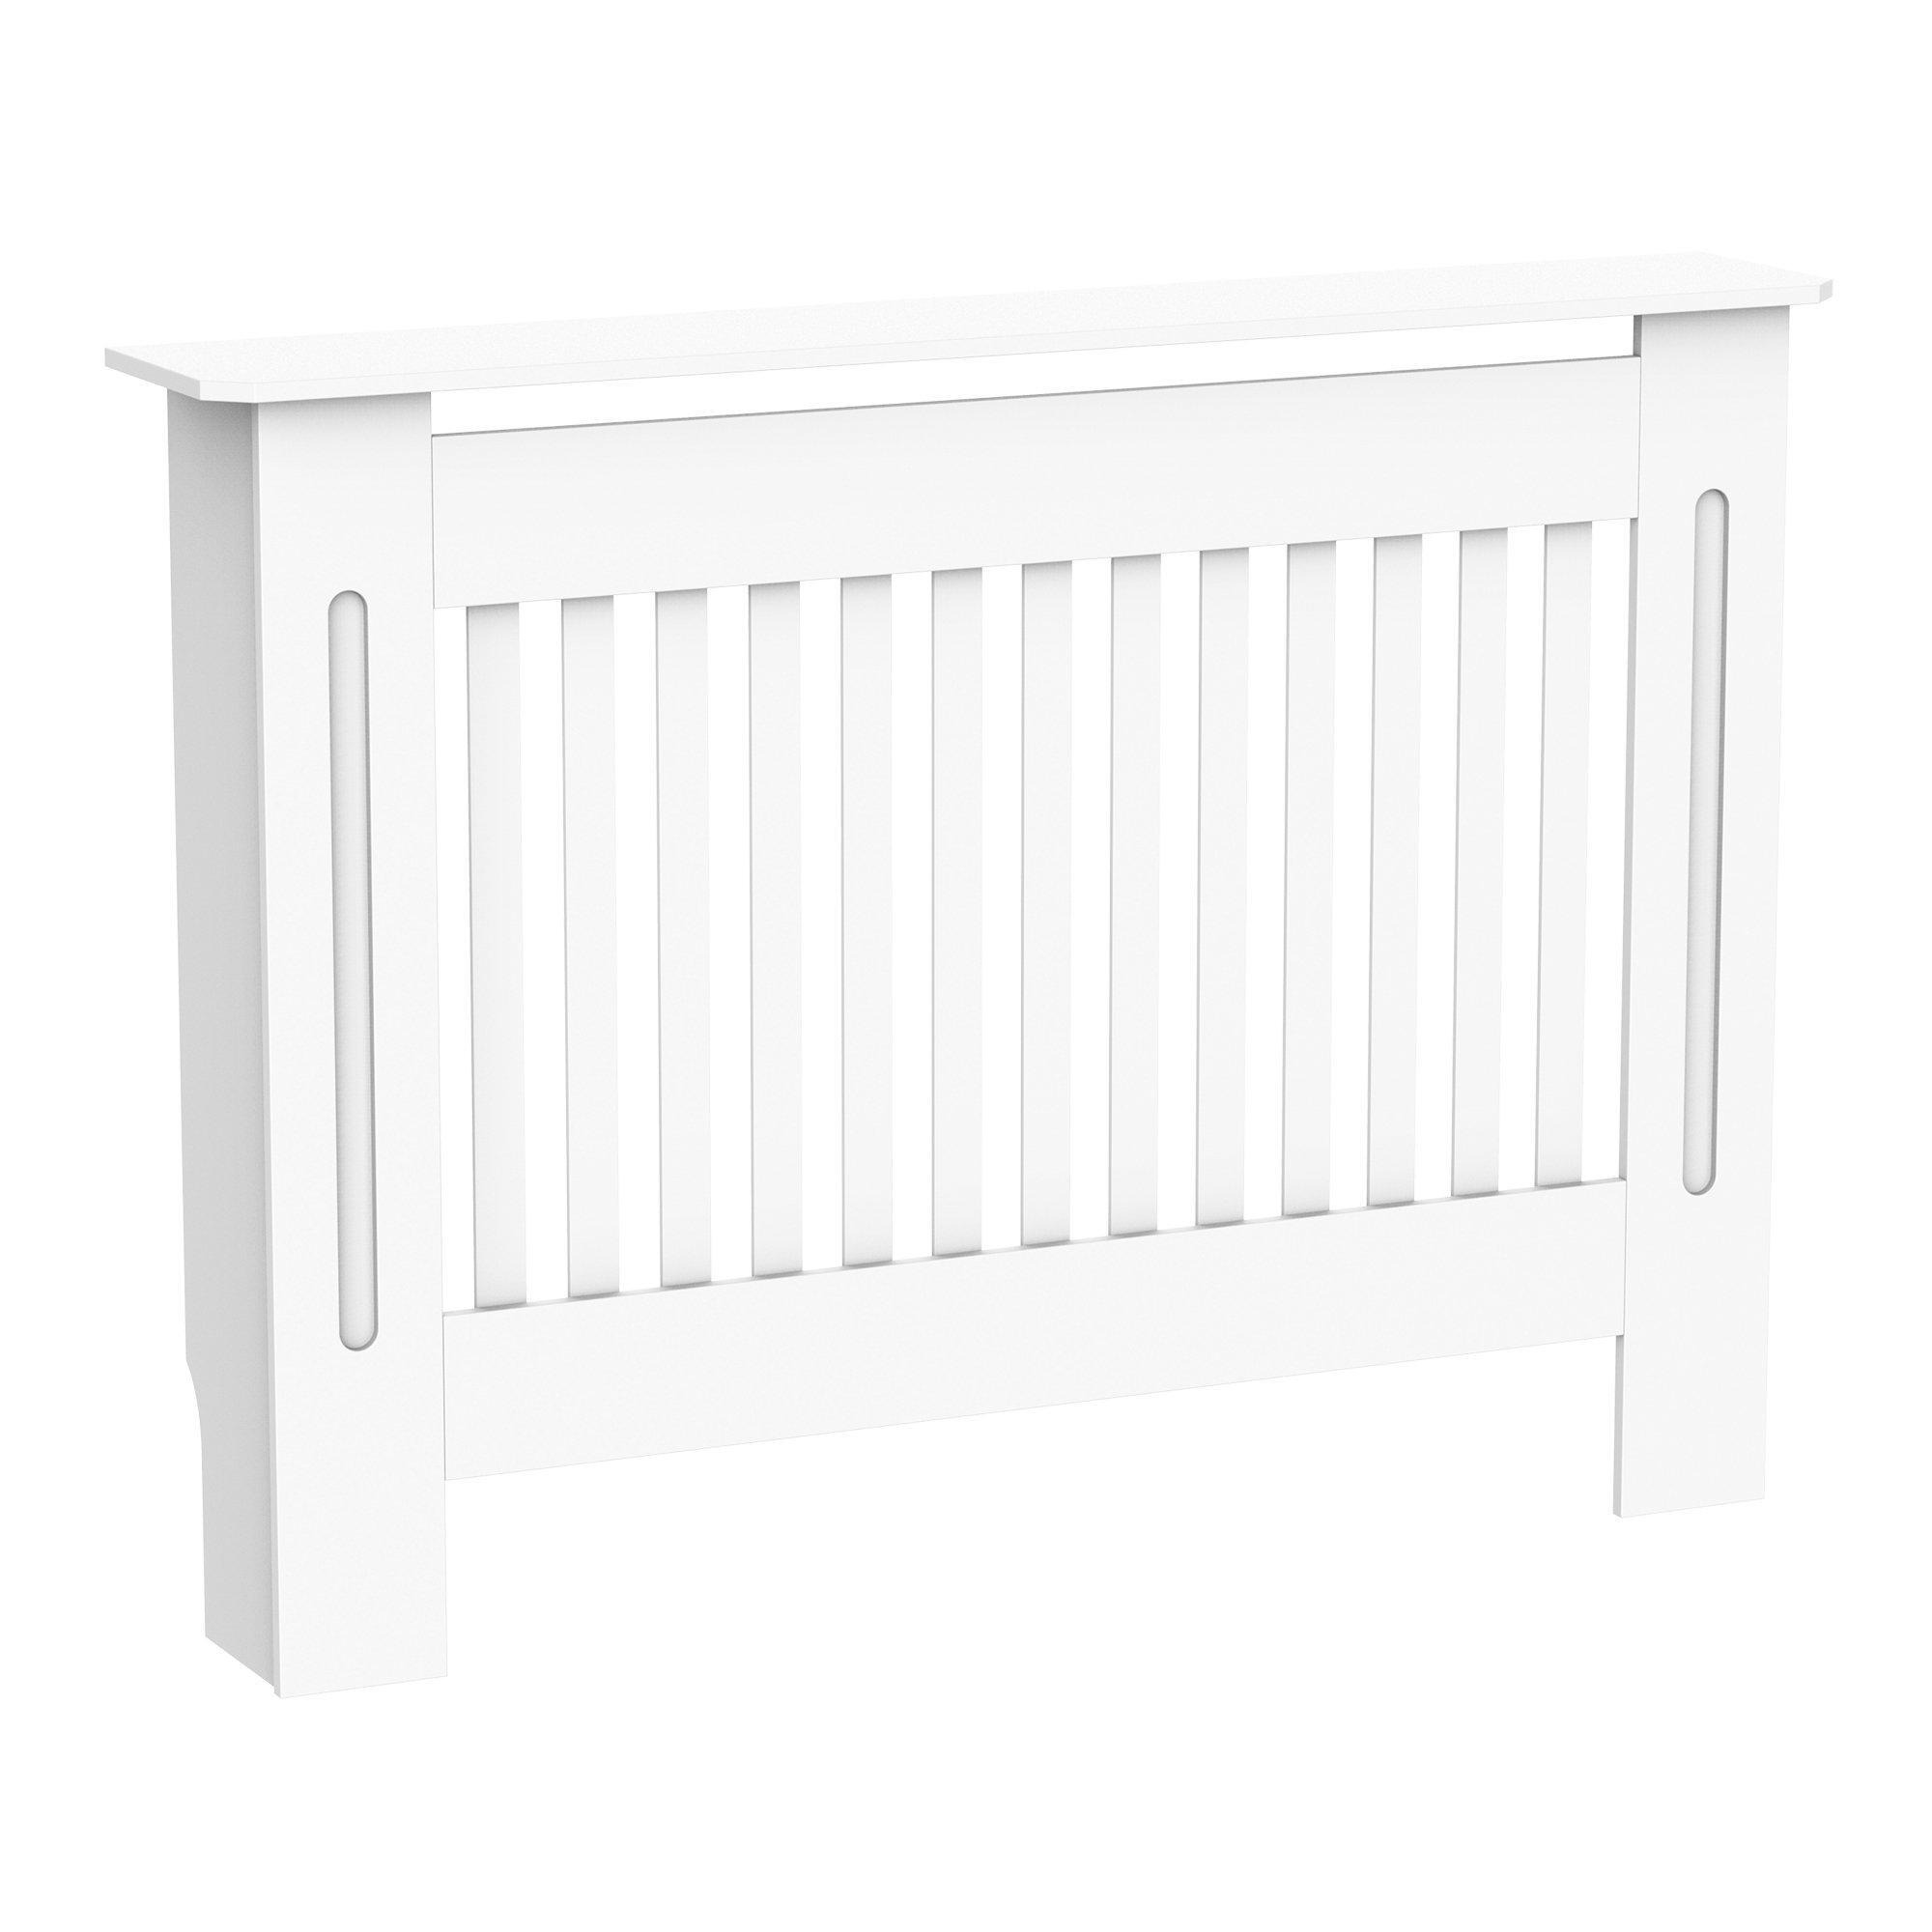 Radiator Cover Painted Slatted MDF Cabinet Lined Grill - image 1